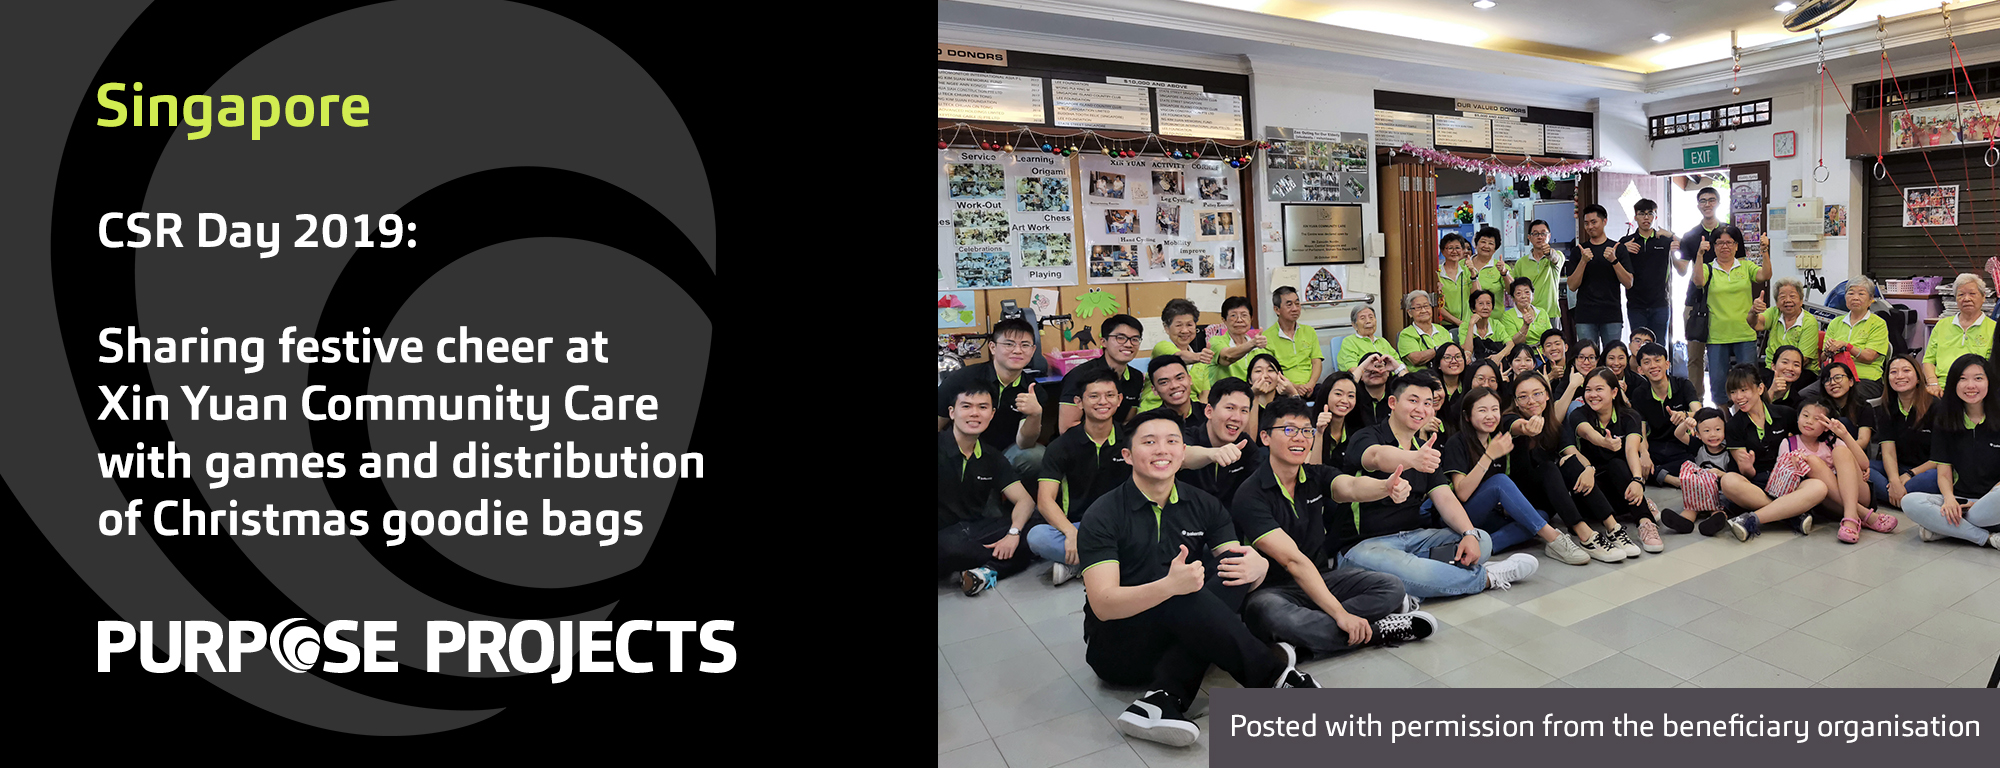 Baker Tilly Singapore CSR Day 2019_Purpose Projects_Xin Yuan Community Care_Purpose Projects